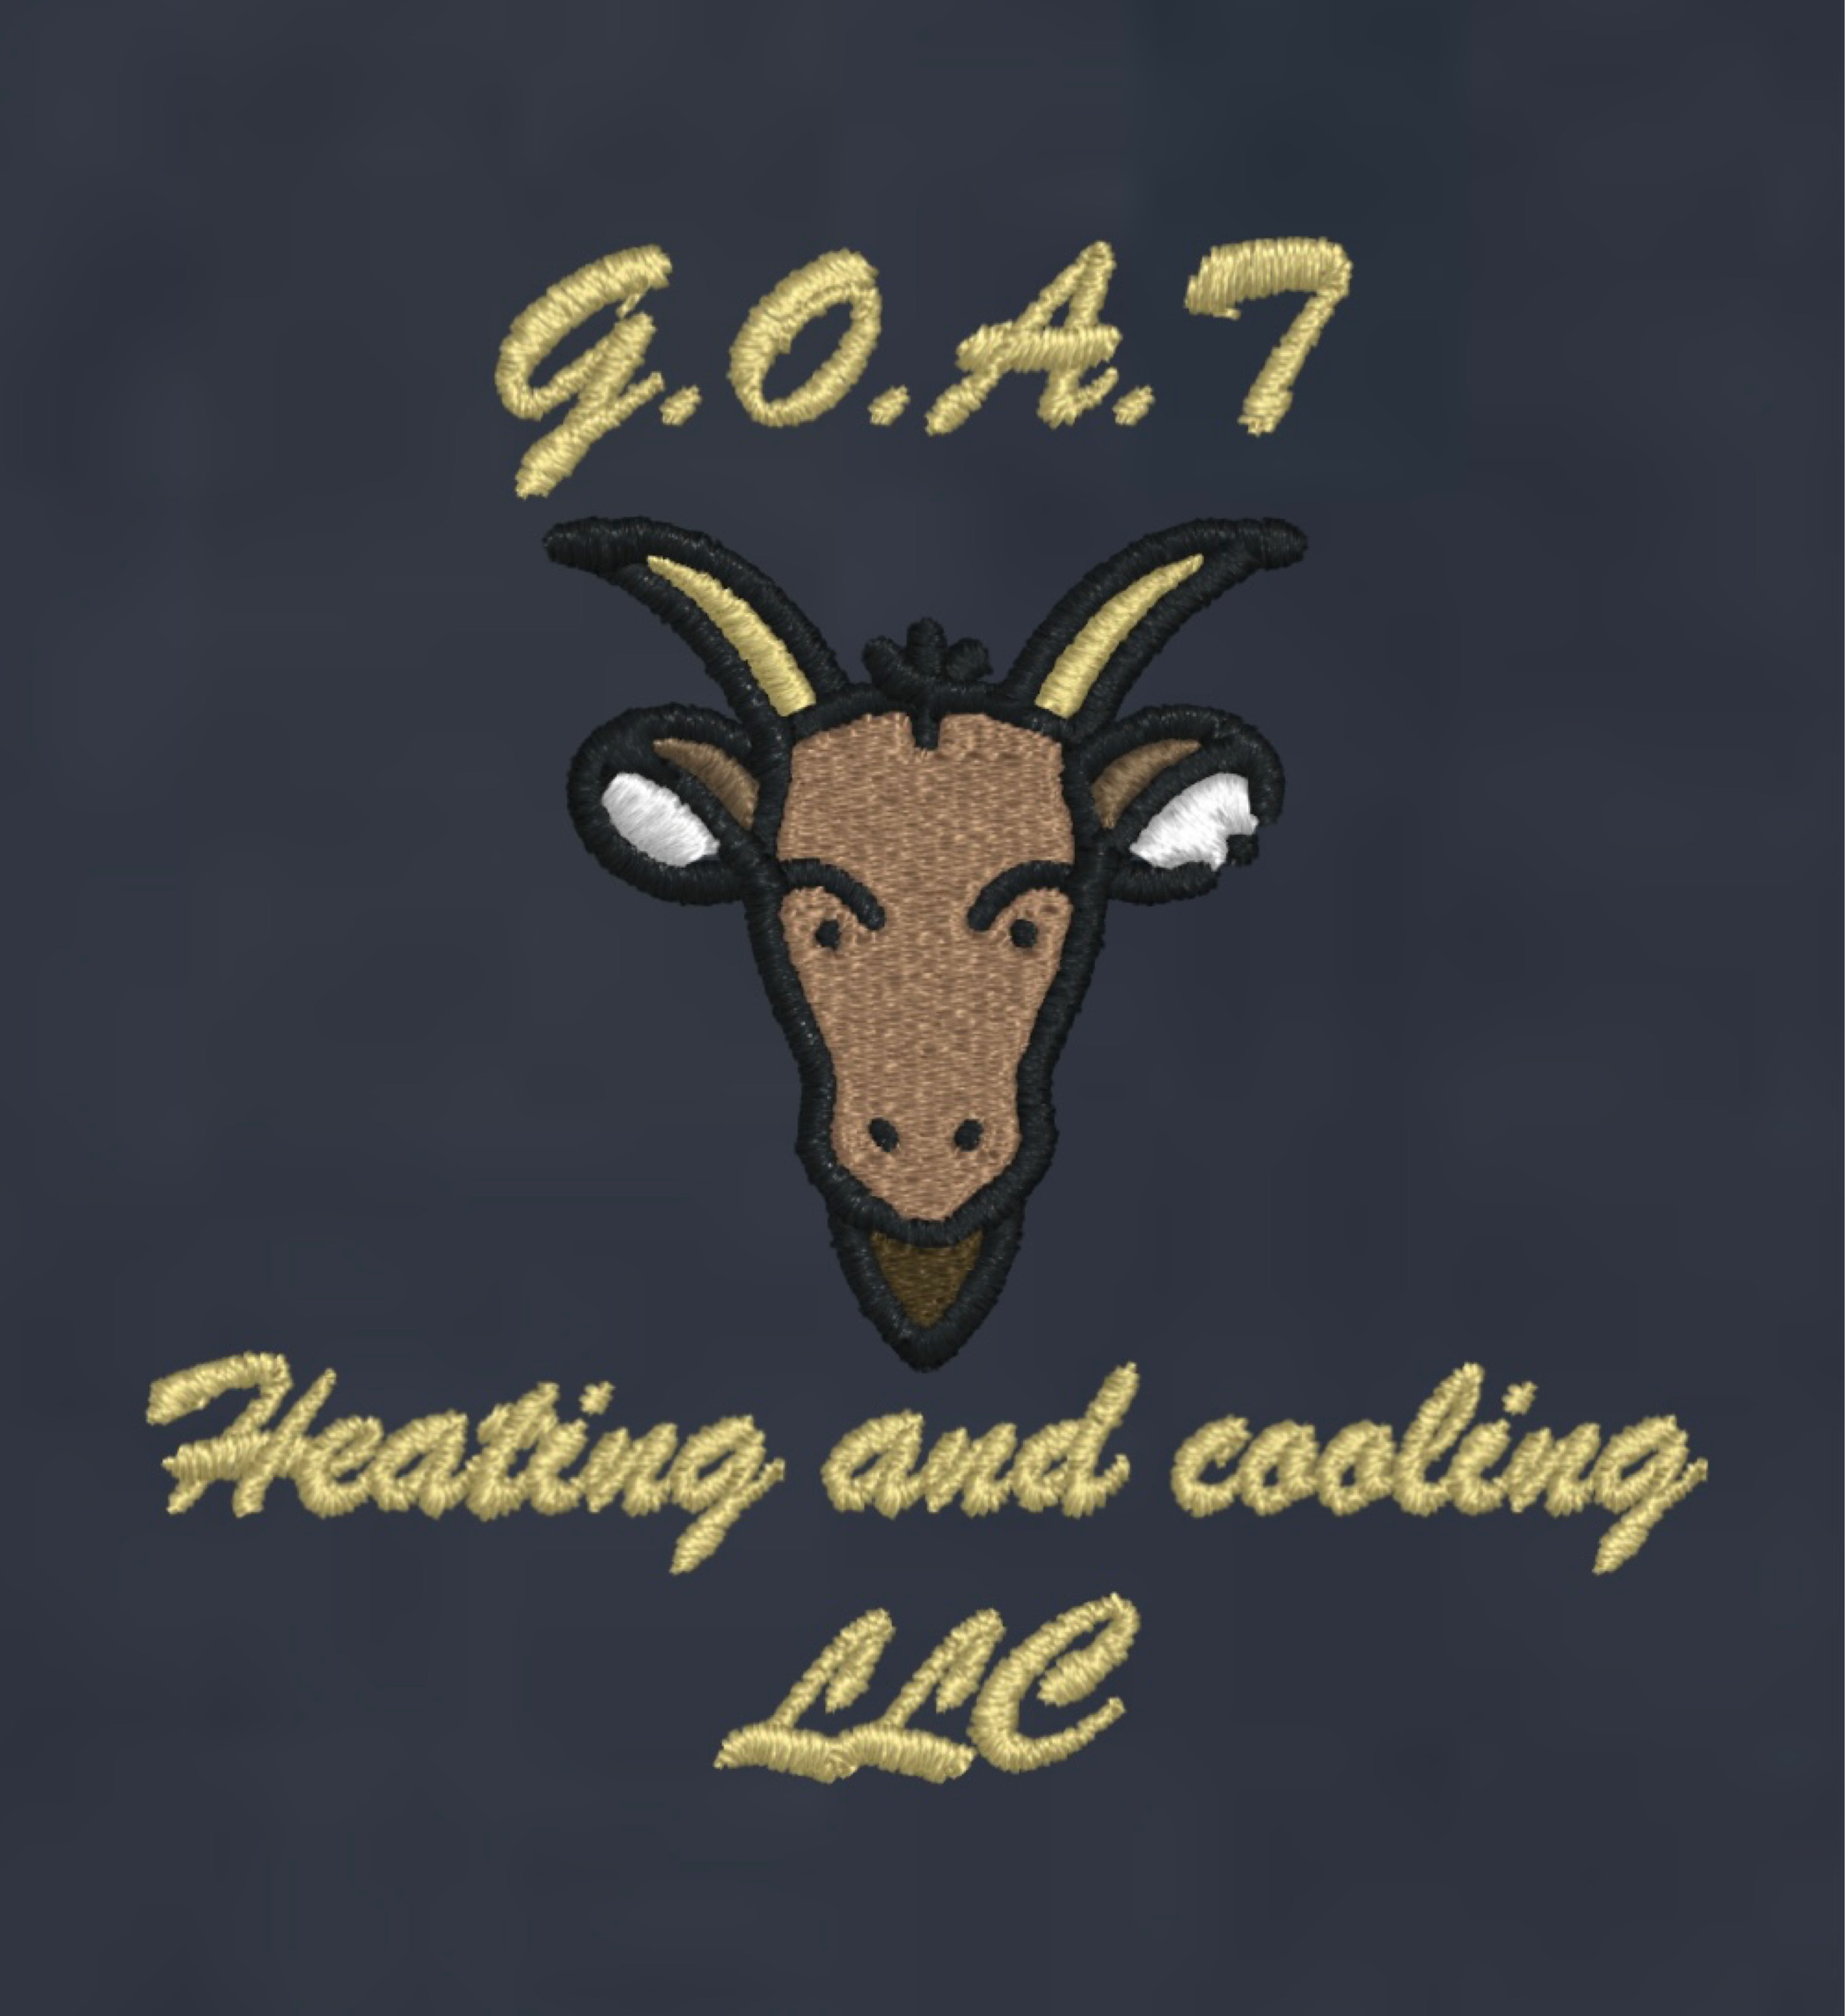 G O A T Heating and Cooling -- Heating & Air Conditioning/HVAC Logo